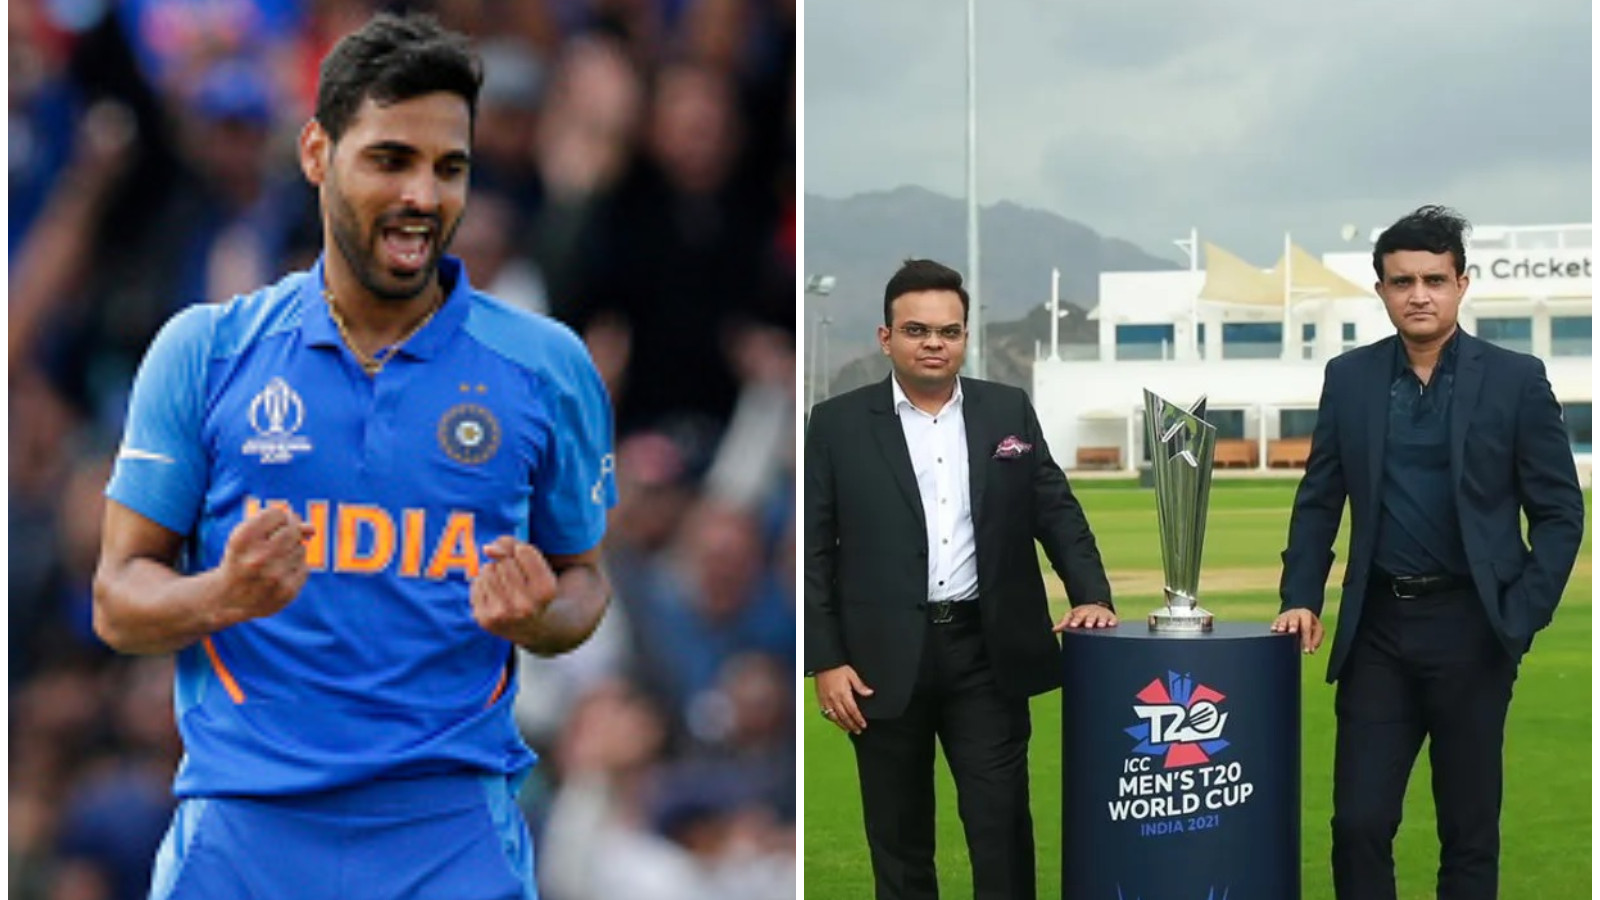 ‘It is going to be a high intensity match’, Bhuvneshwar Kumar on T20 World Cup clash against Pakistan